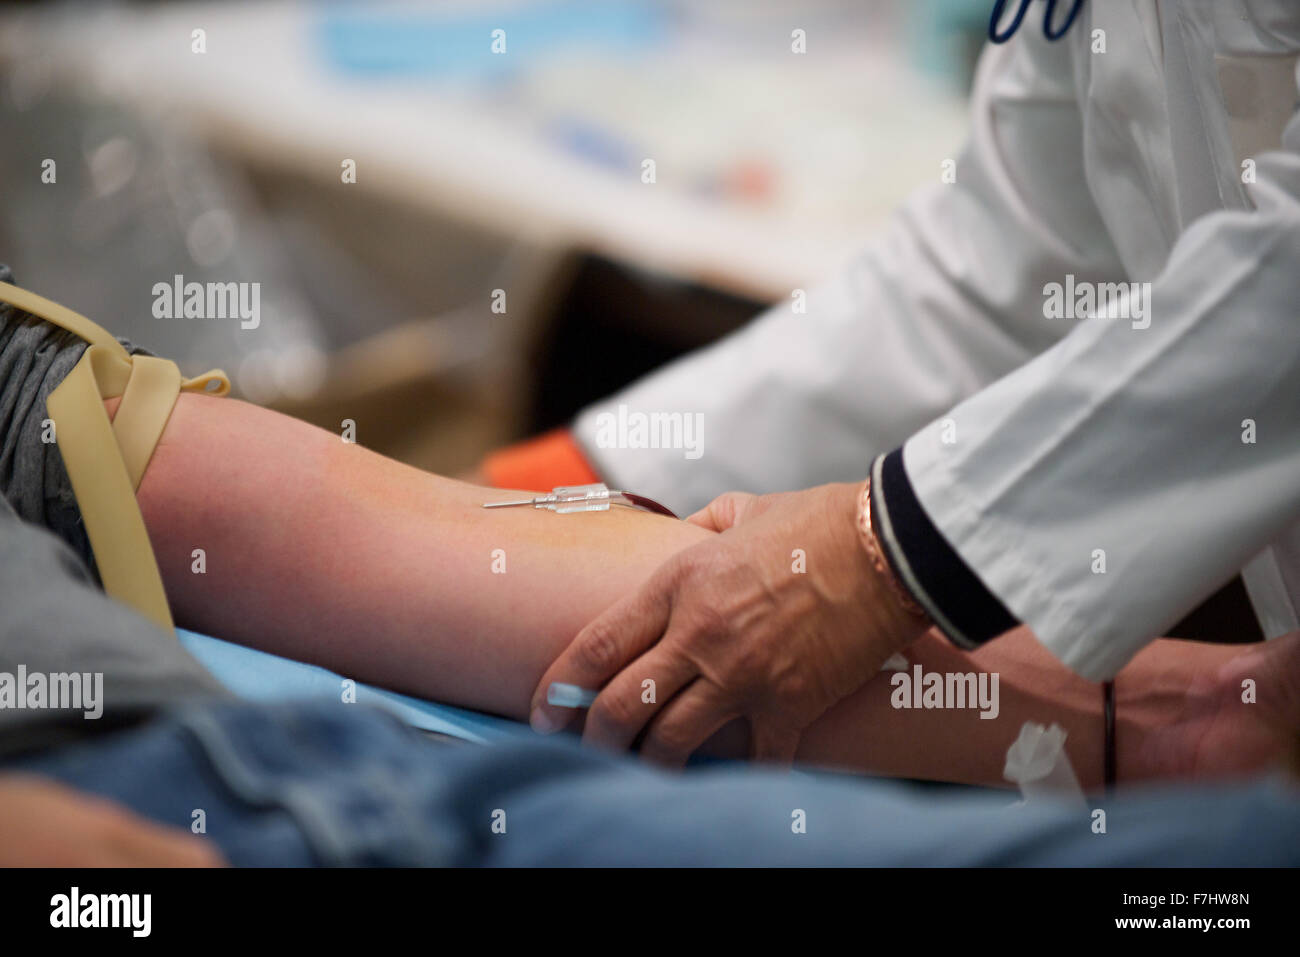 Person giving blood, close-up Stock Photo